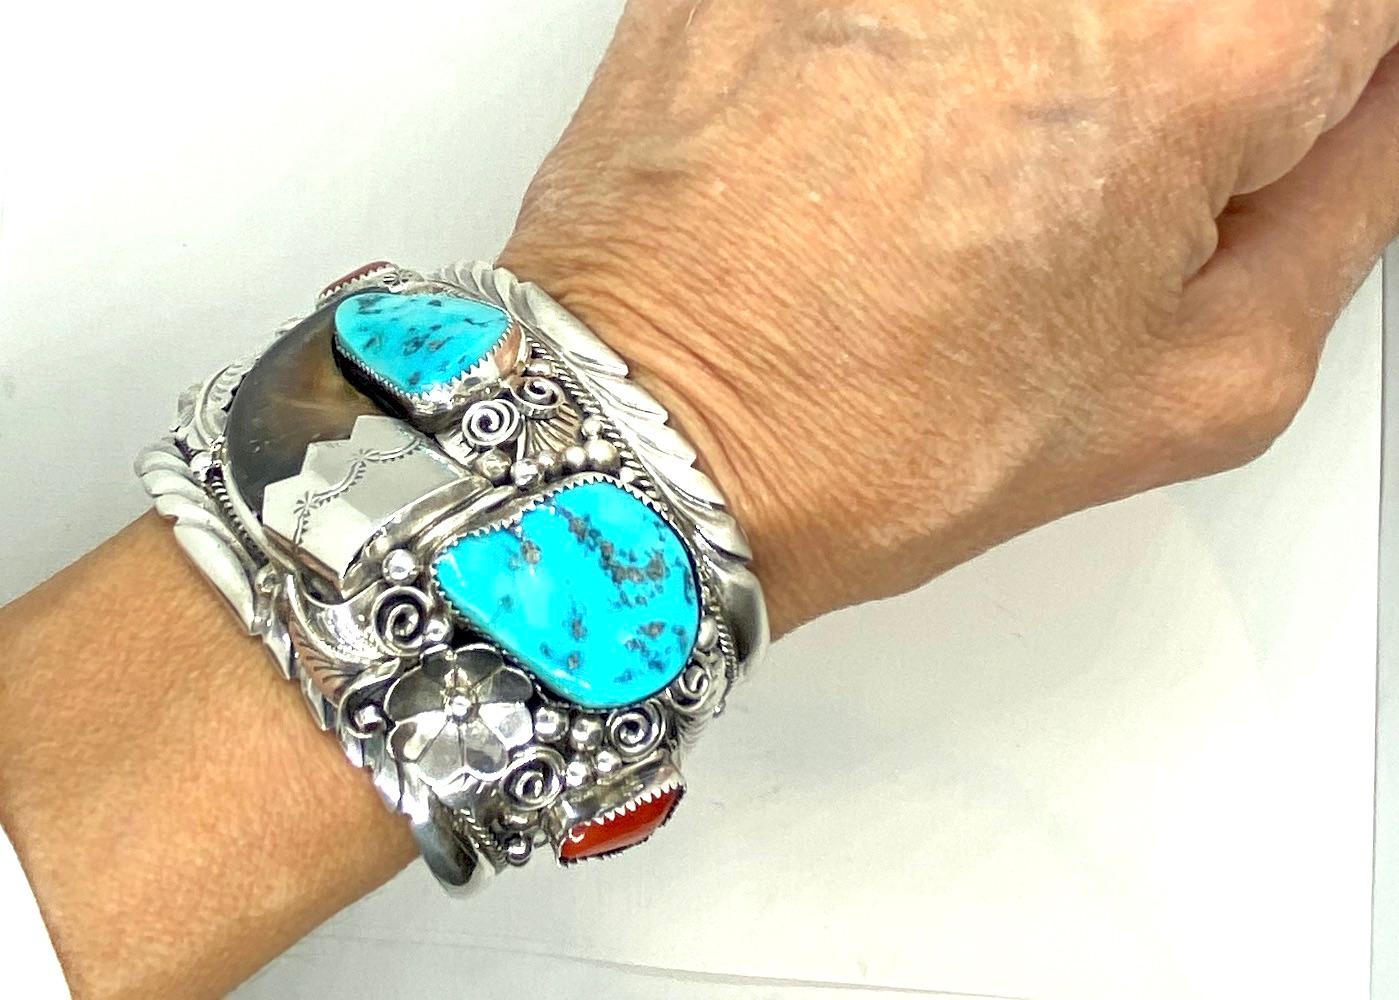 JW Toadlena Native American Bear Cuff Bracelet with Turquoise and Coral 4.12 Oz 1